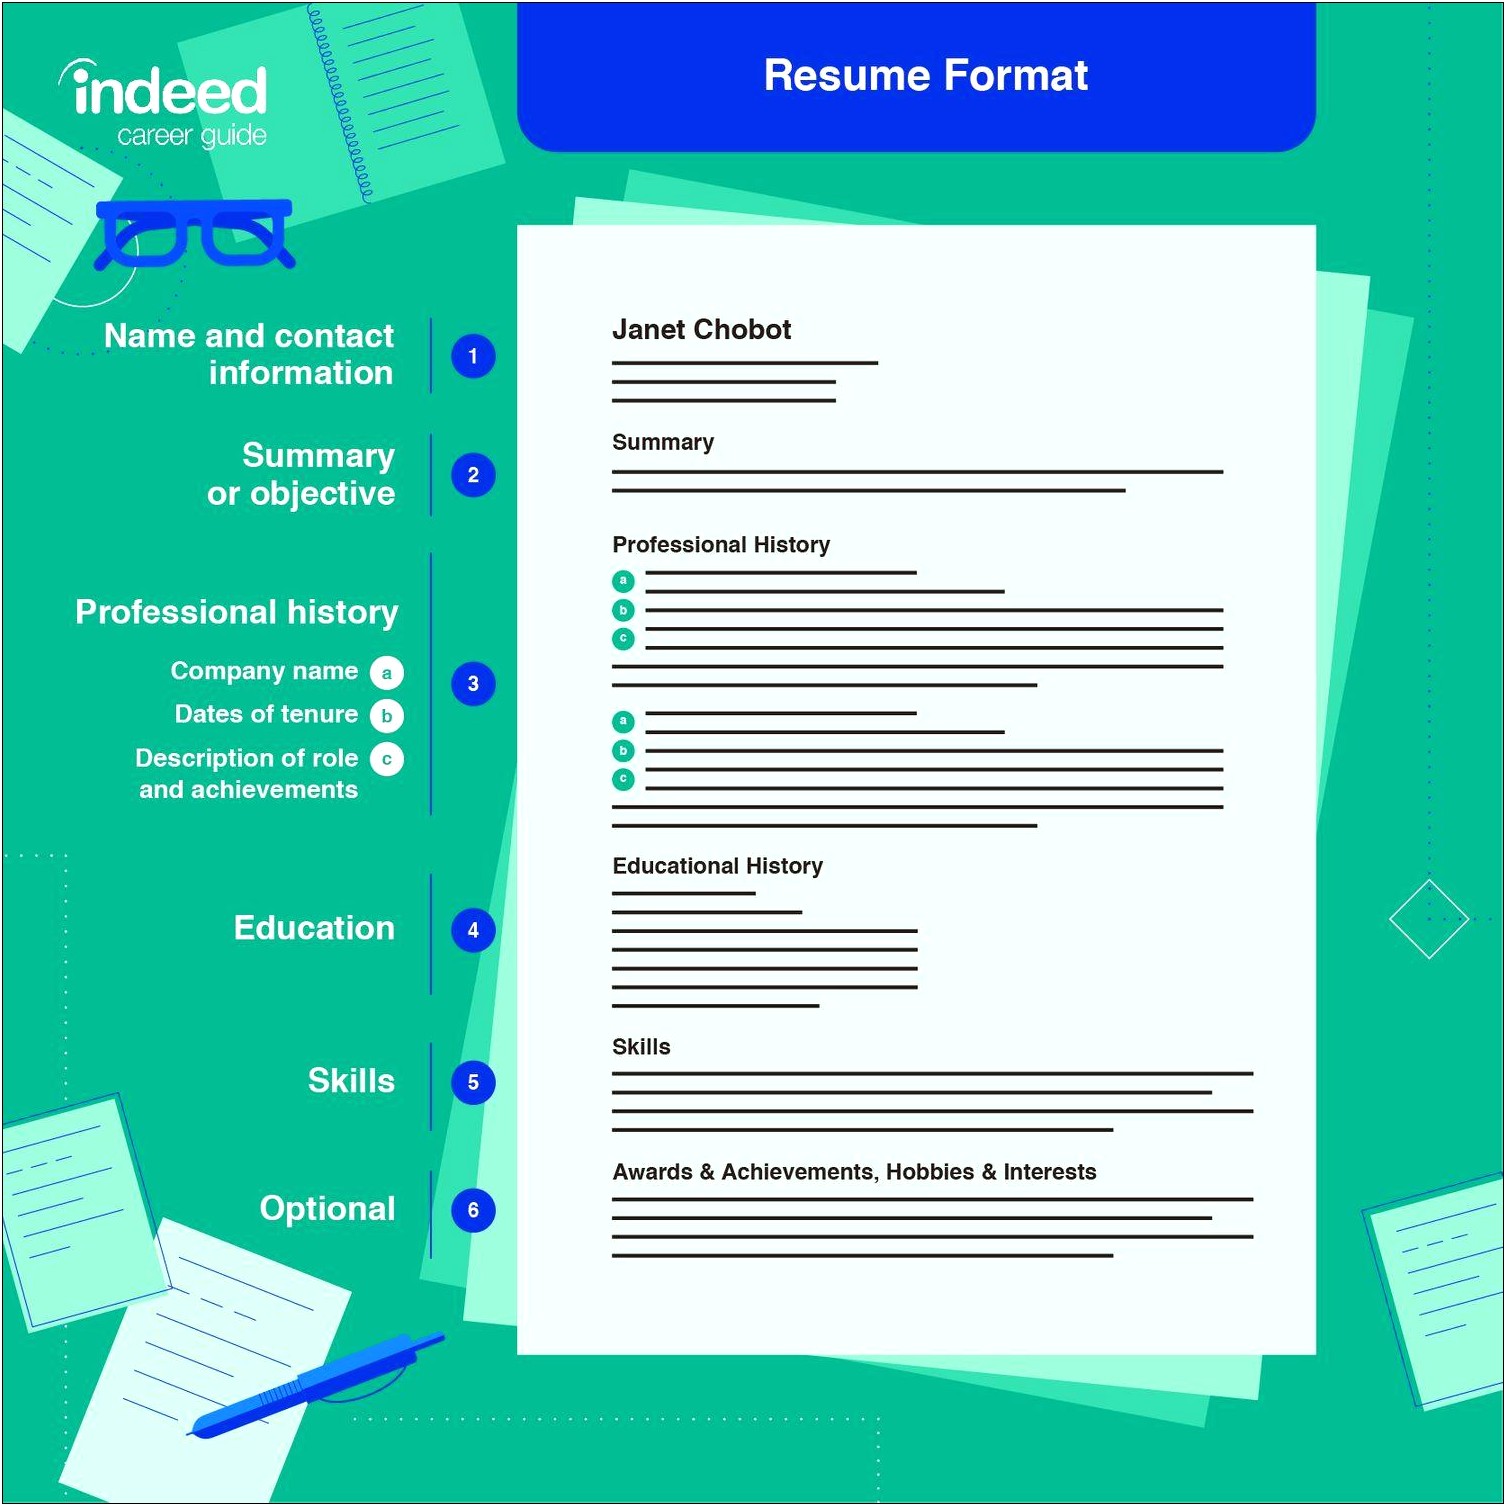 Create Your Resume Using Generic Templates In Hindi